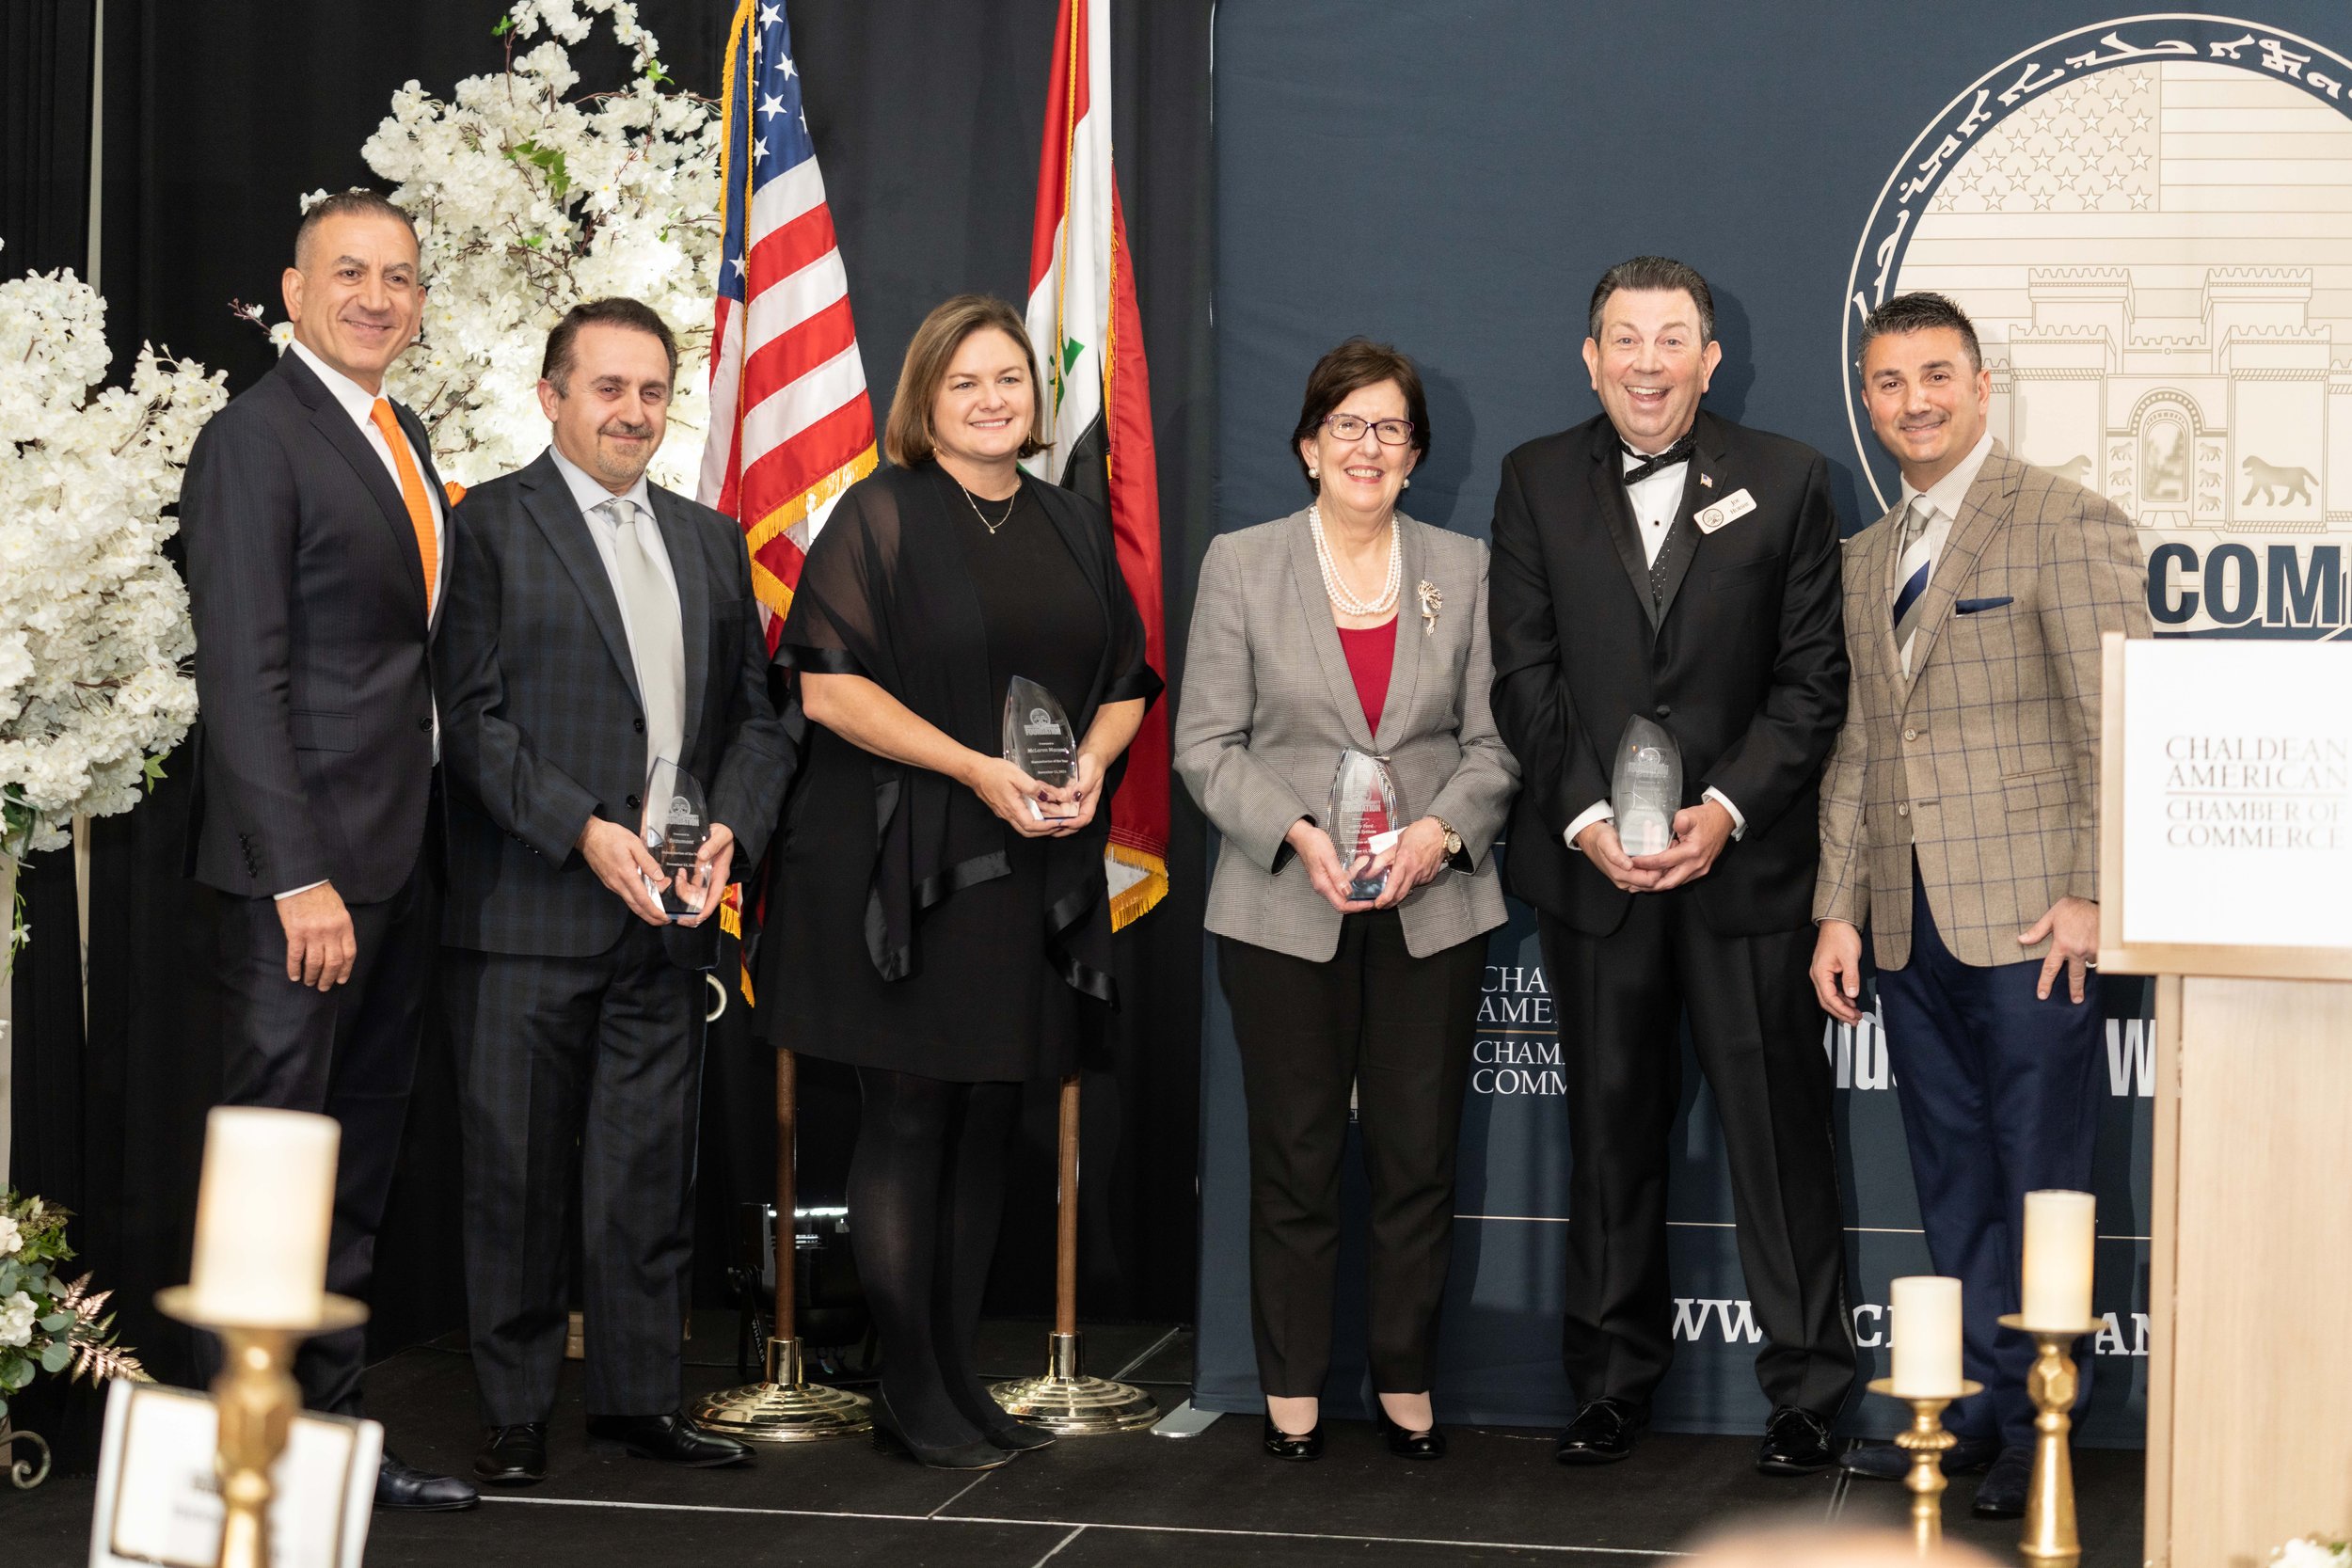  Representatives from McLaren, Beaumont, Henry Ford, and Ascension receiving their Humanitarian of the Year awards. From left to right: Saber Ammori, Dr. Laith Jamil, Kelly McNally, Barbara Rossmann, Joseph Hurshe, and Martin Manna. 